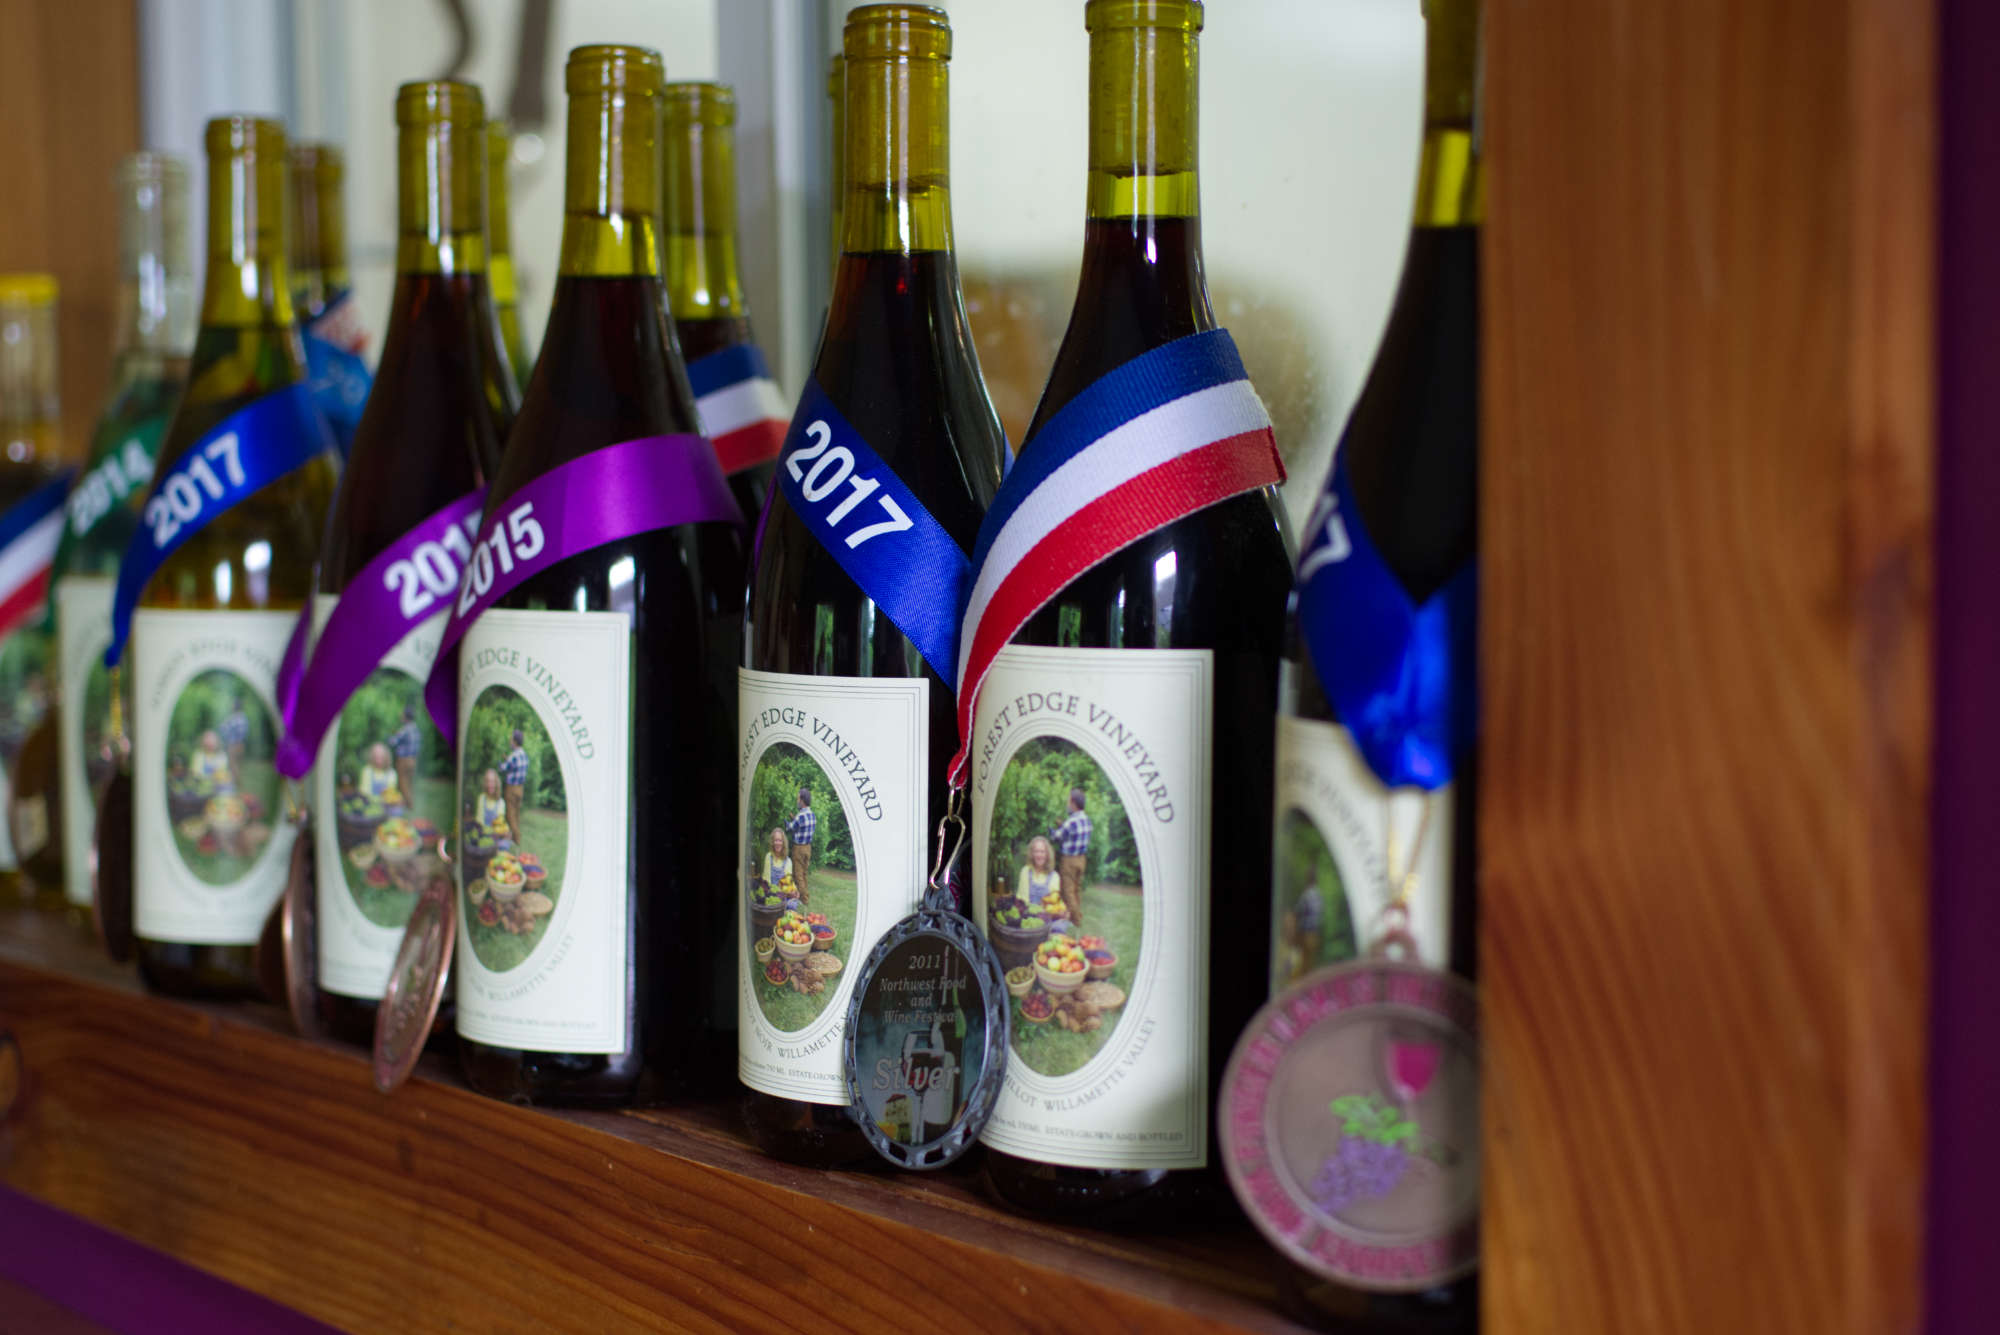 Bottles of wine with medals for wine competitions around them